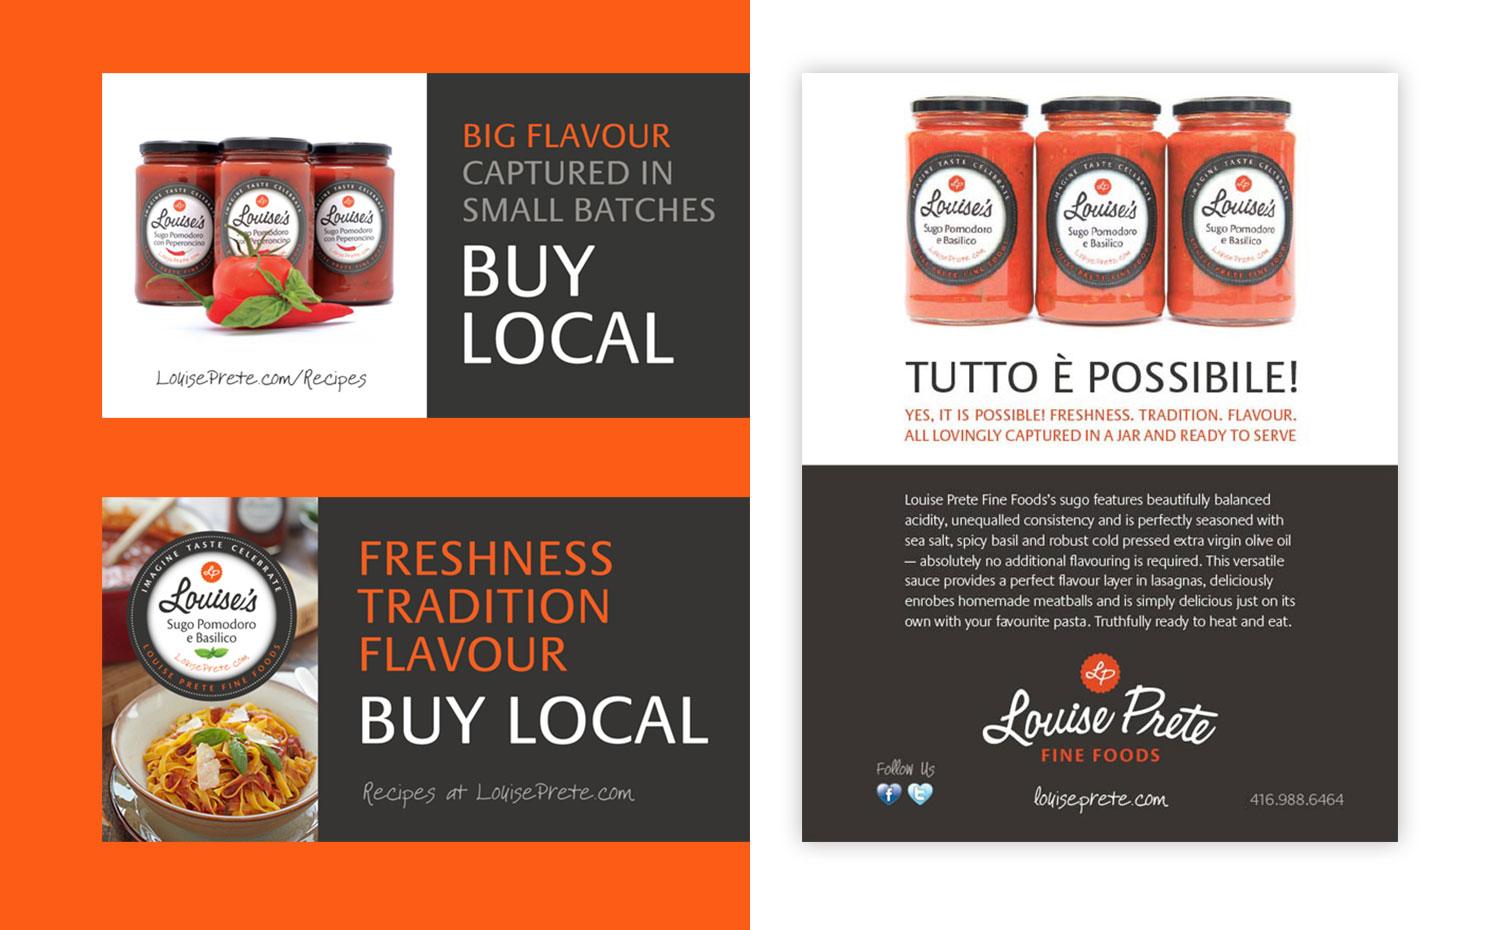 Louise Prete Fine Foods - Magazine ads and shelf-talkers